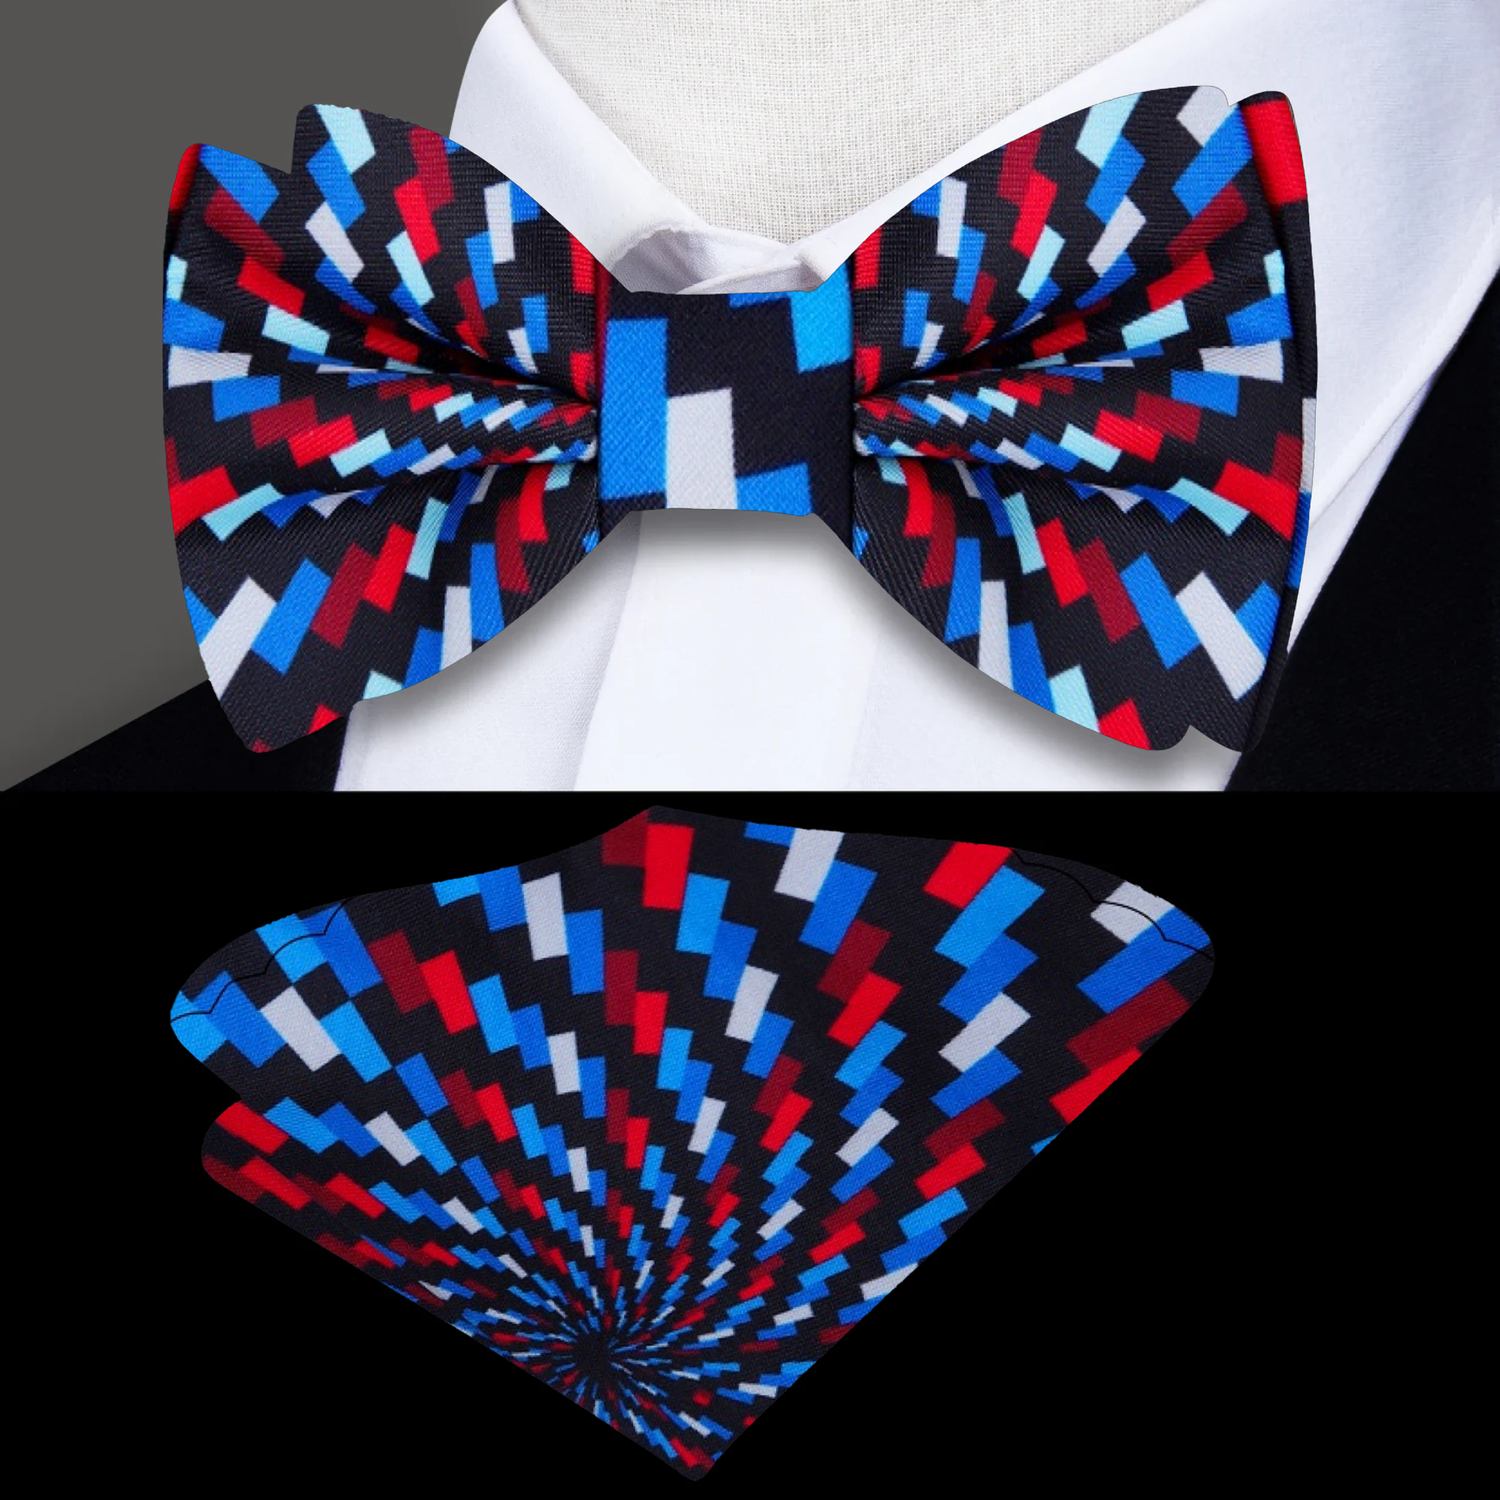 Red, Blue, Black Geometric Swirl Bow Tie and Pocket Square||Red, Blue, Black, White